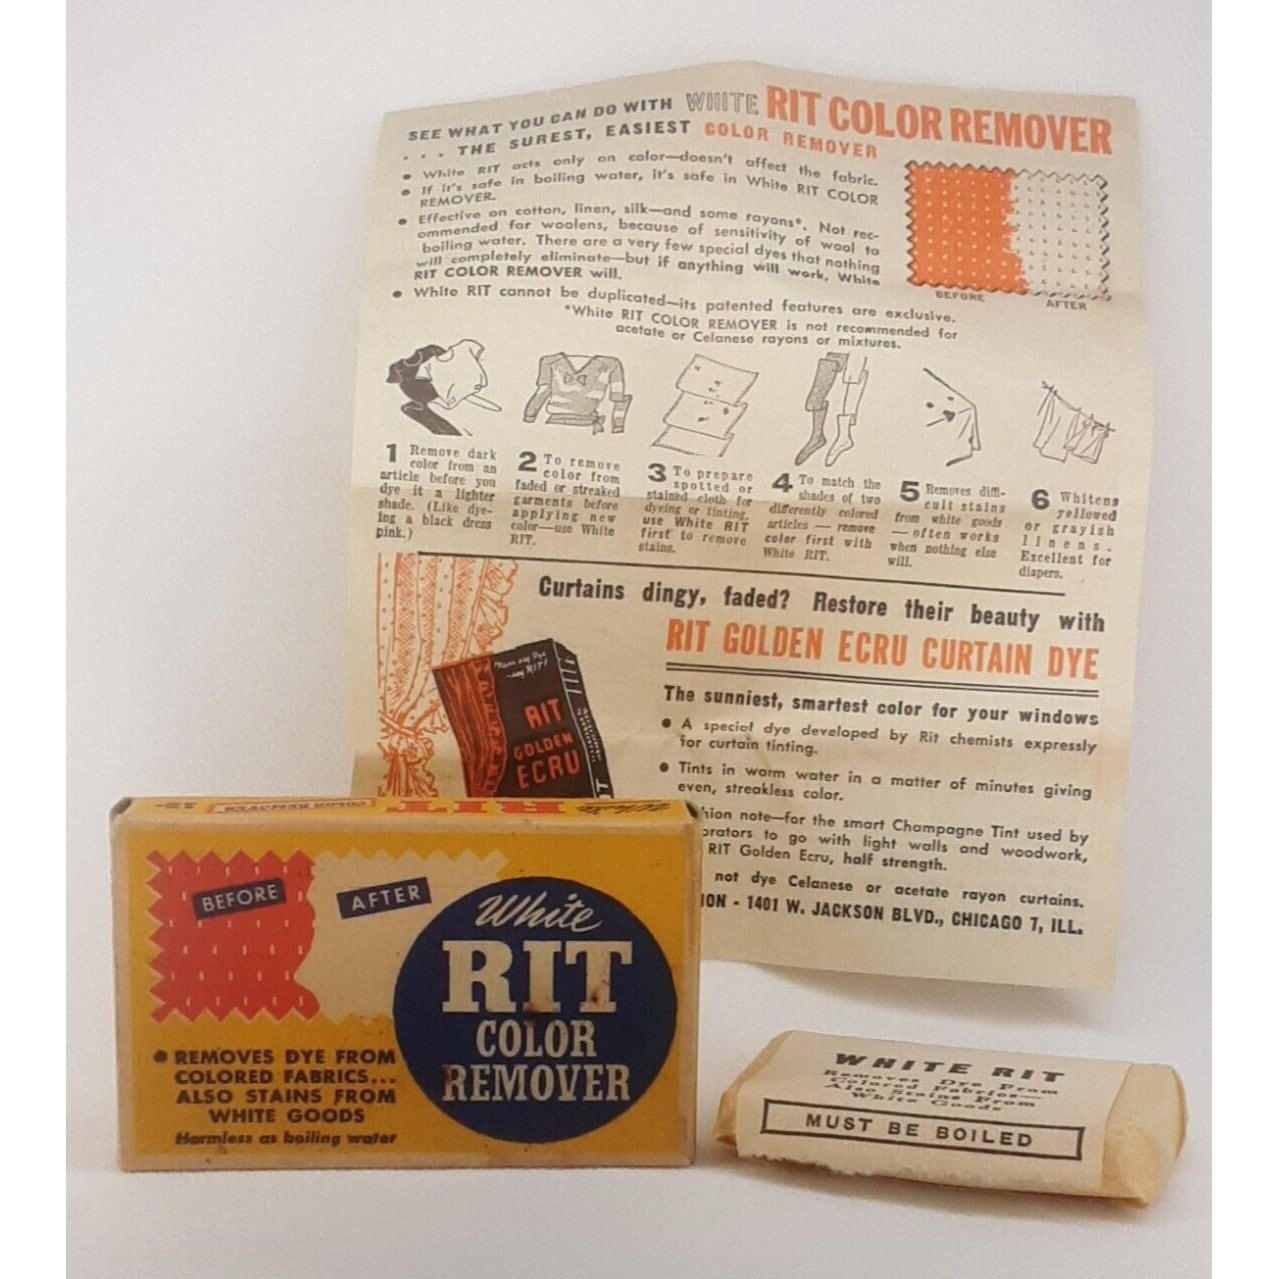  Pack of 2 Rit Dye Laundry Treatment Color Remover